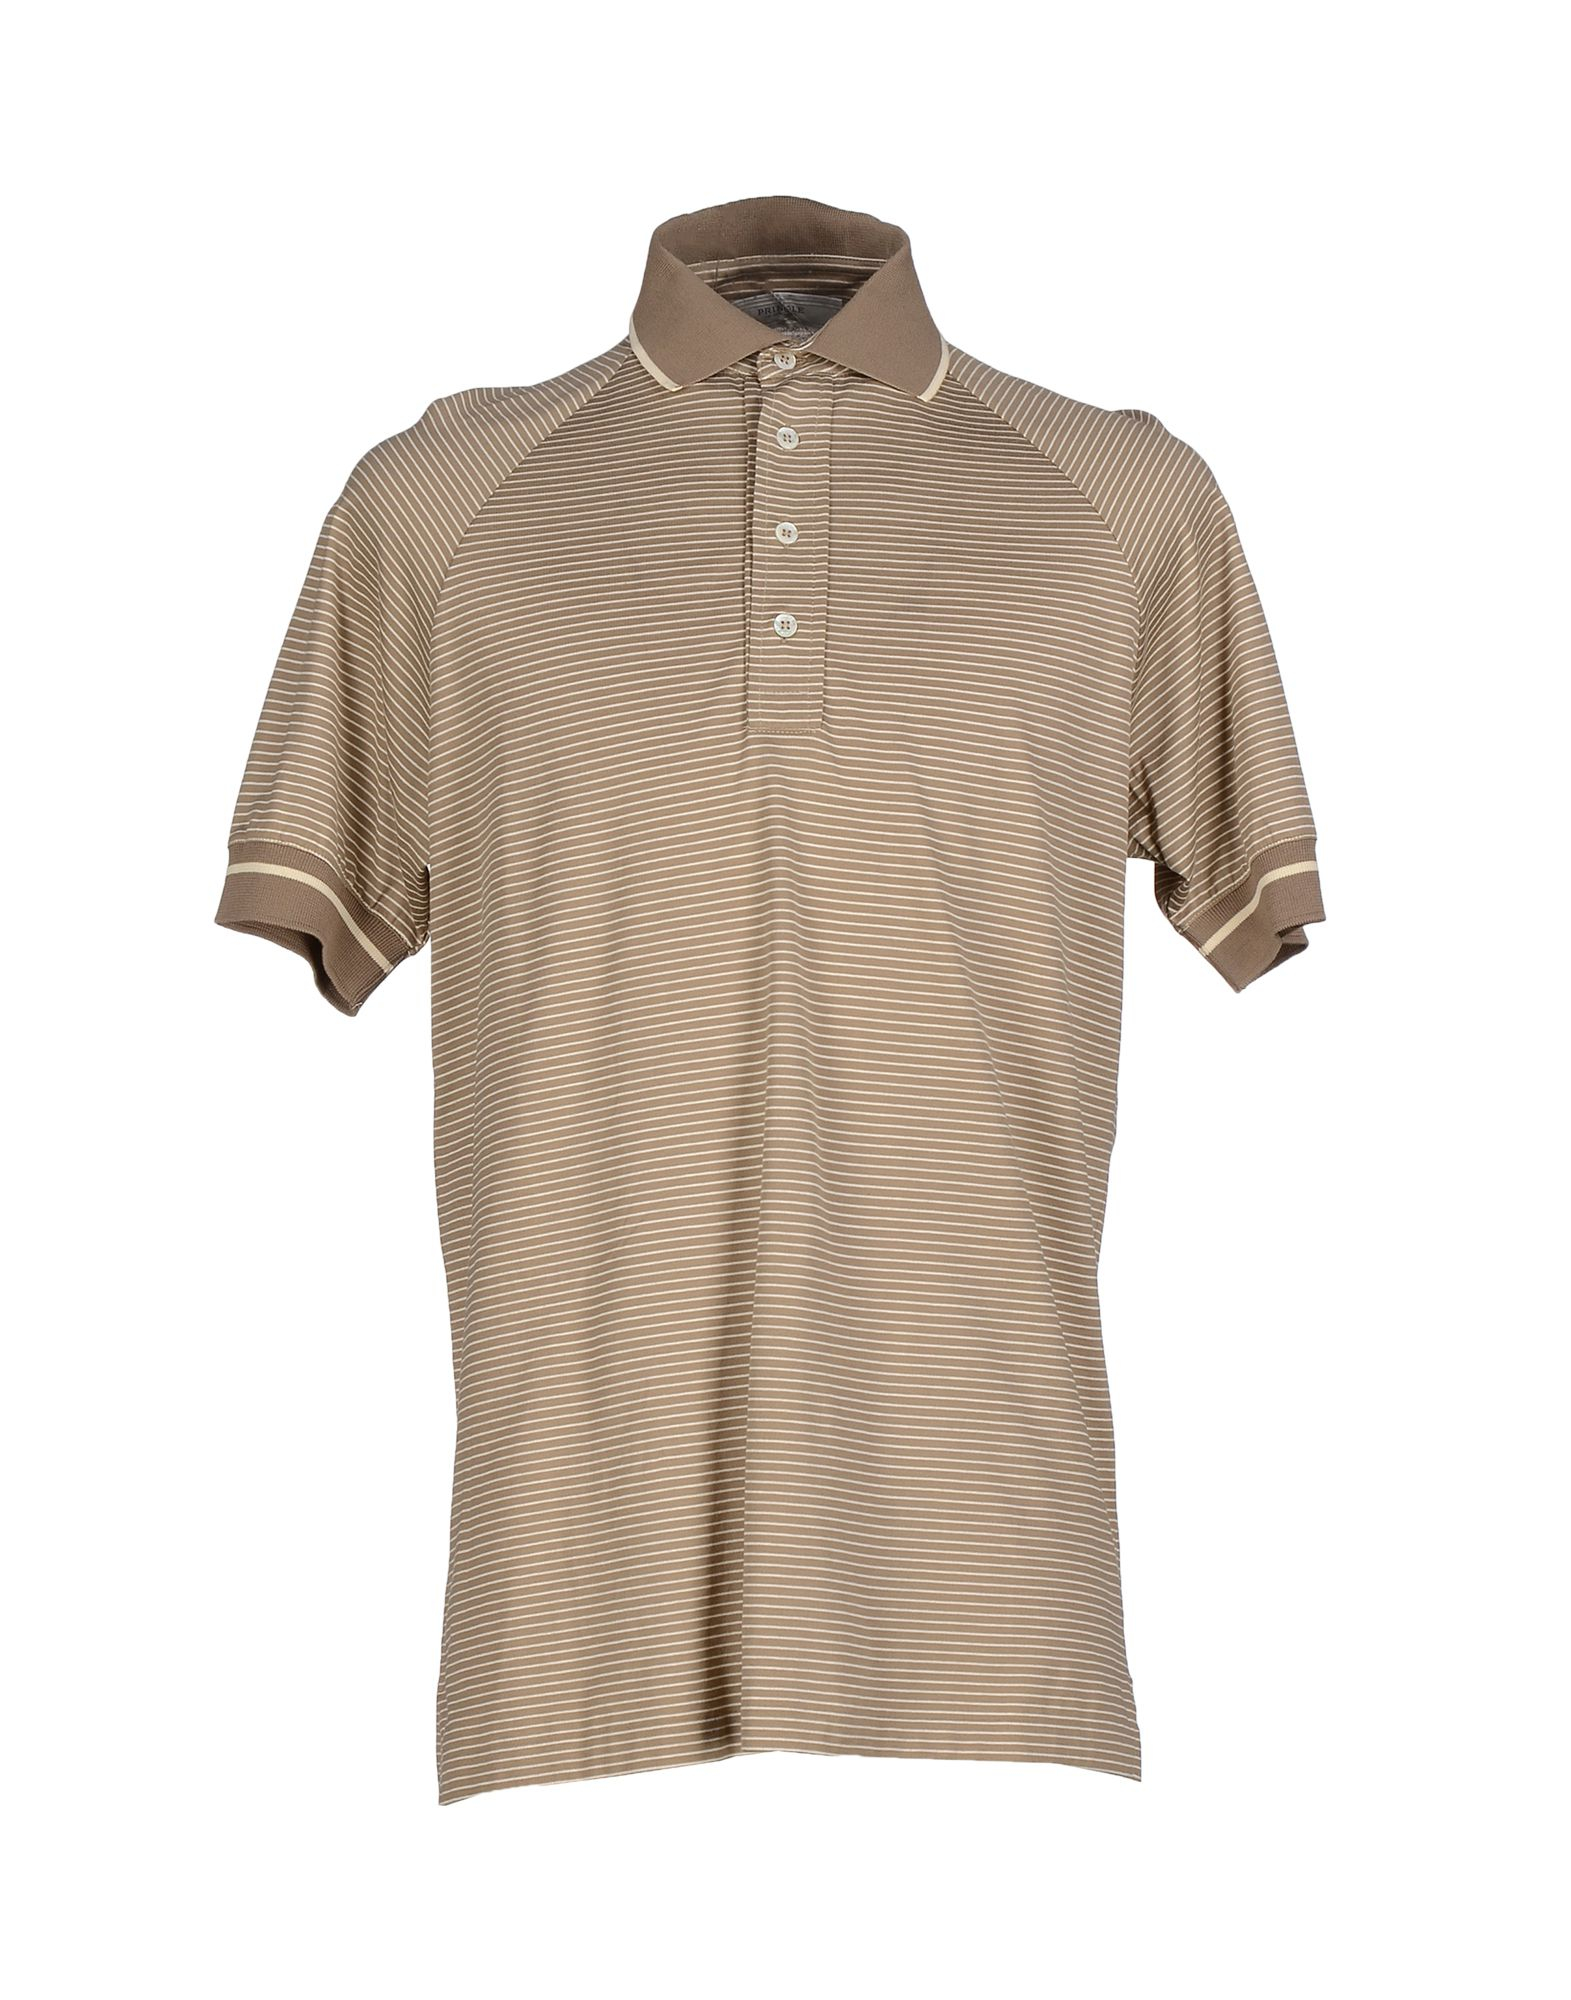 Lyst - Pringle Of Scotland Polo Shirt in Natural for Men